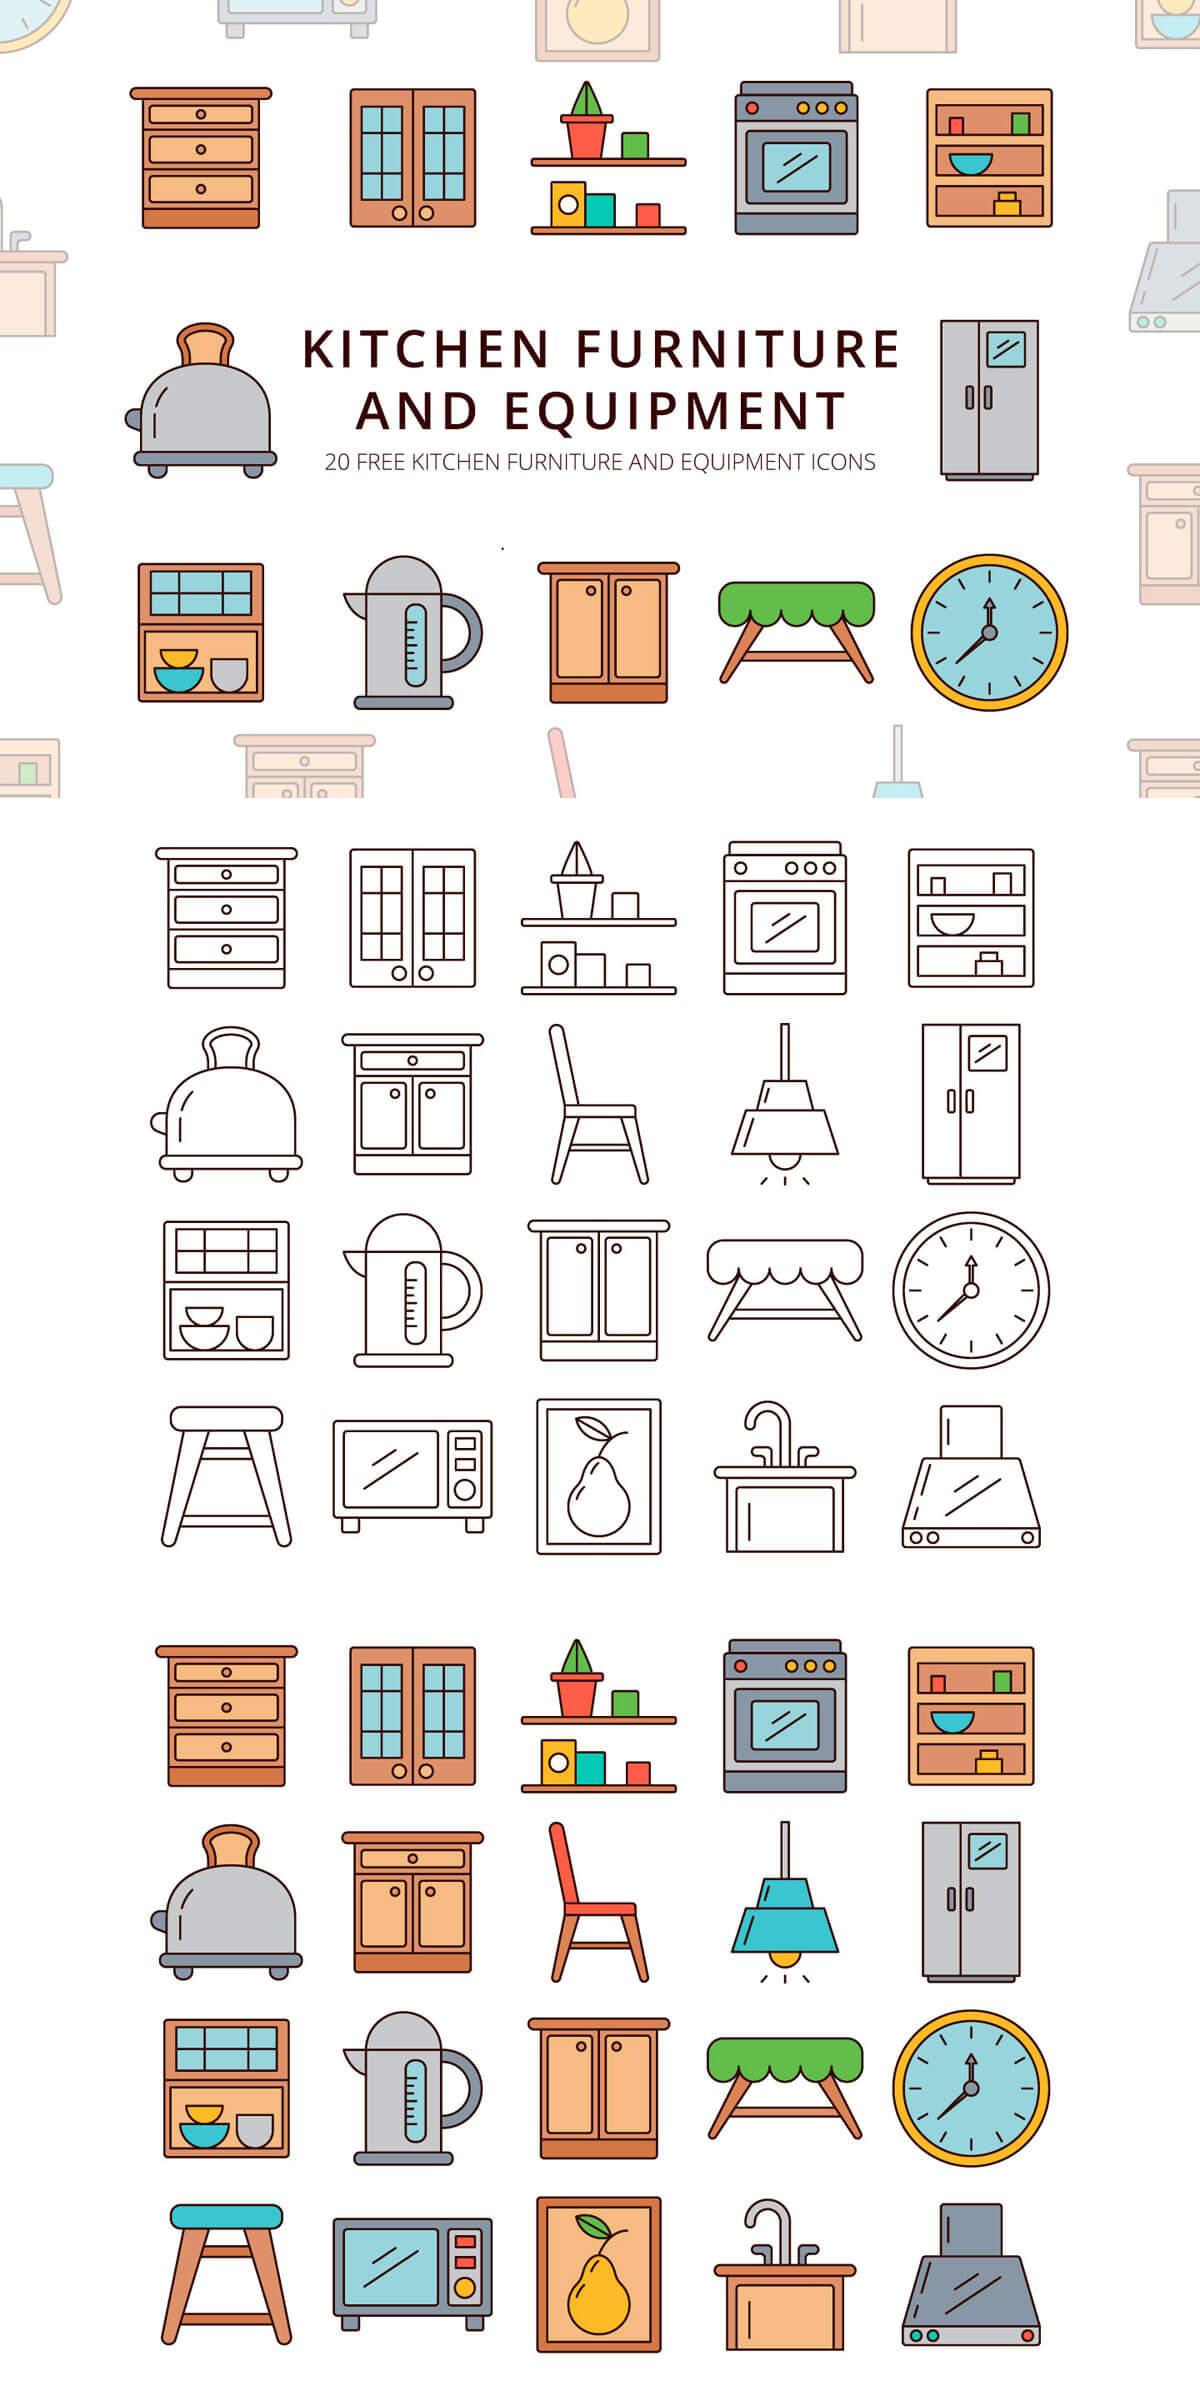 Free Kitchen Furniture and Equipment Vector Icon Set